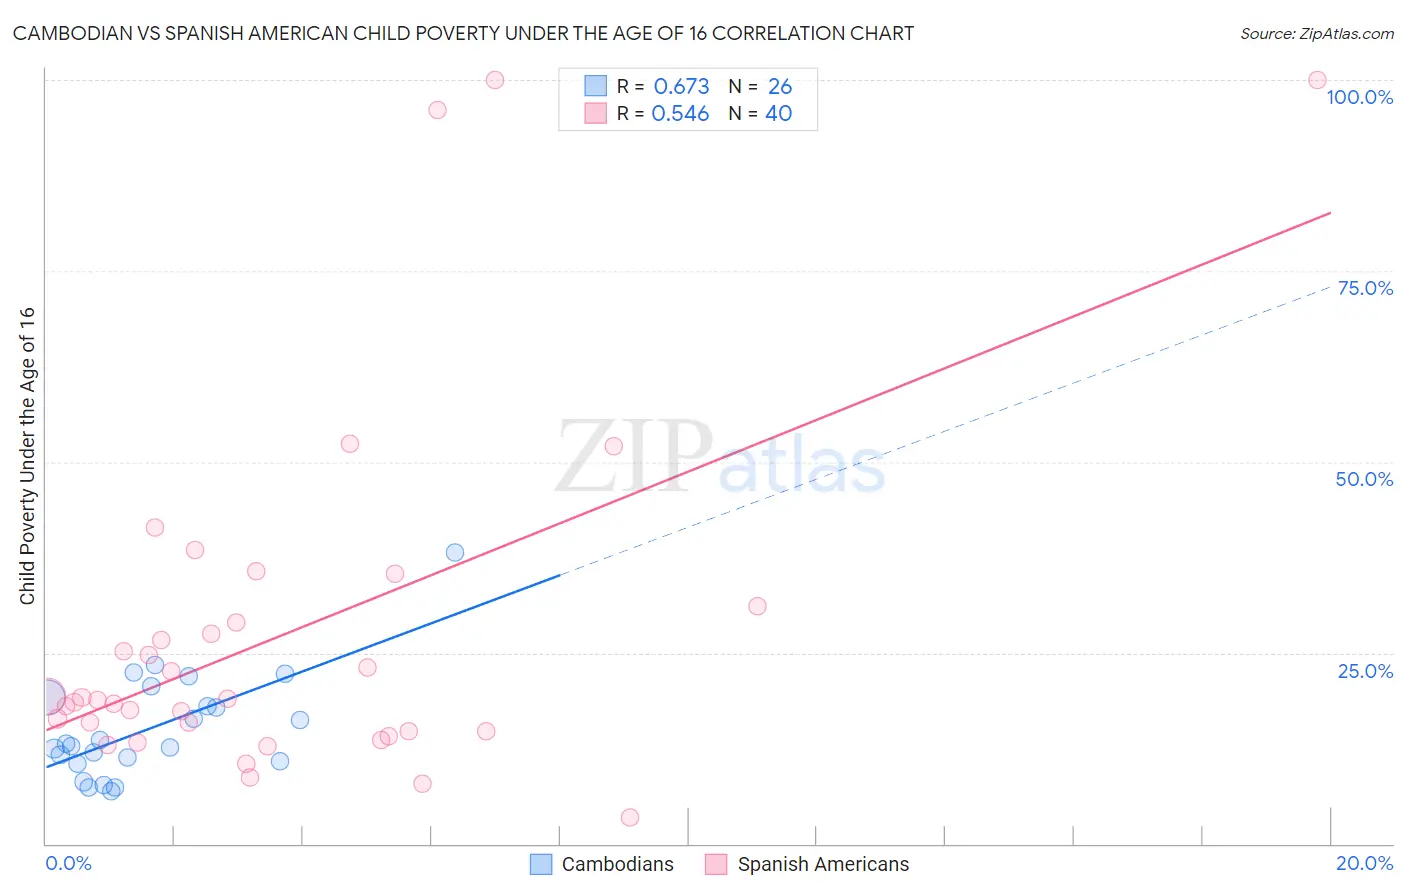 Cambodian vs Spanish American Child Poverty Under the Age of 16